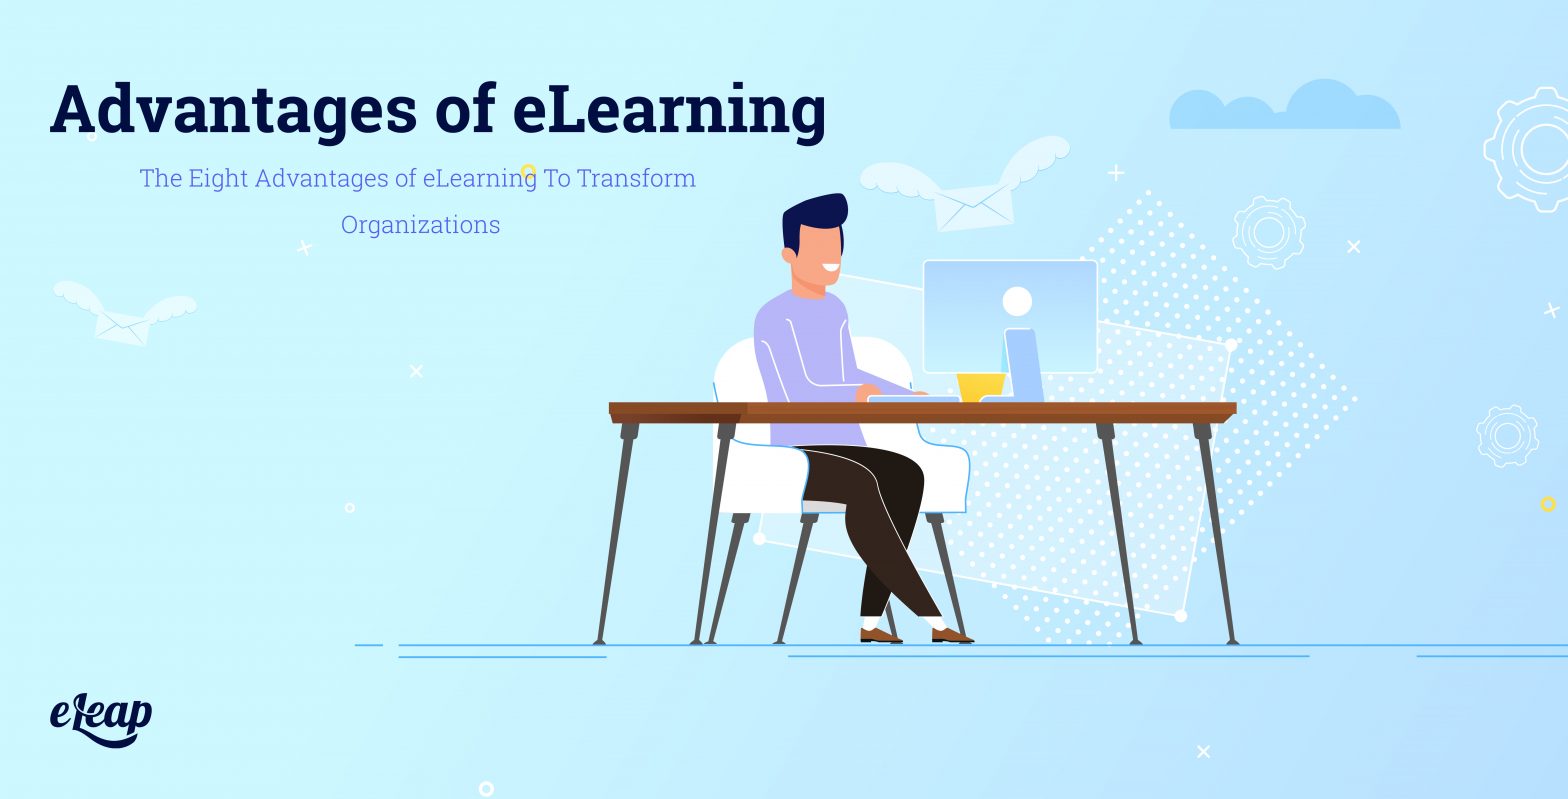 Advantages of eLearning | 8 ways elearning powers the best organizations